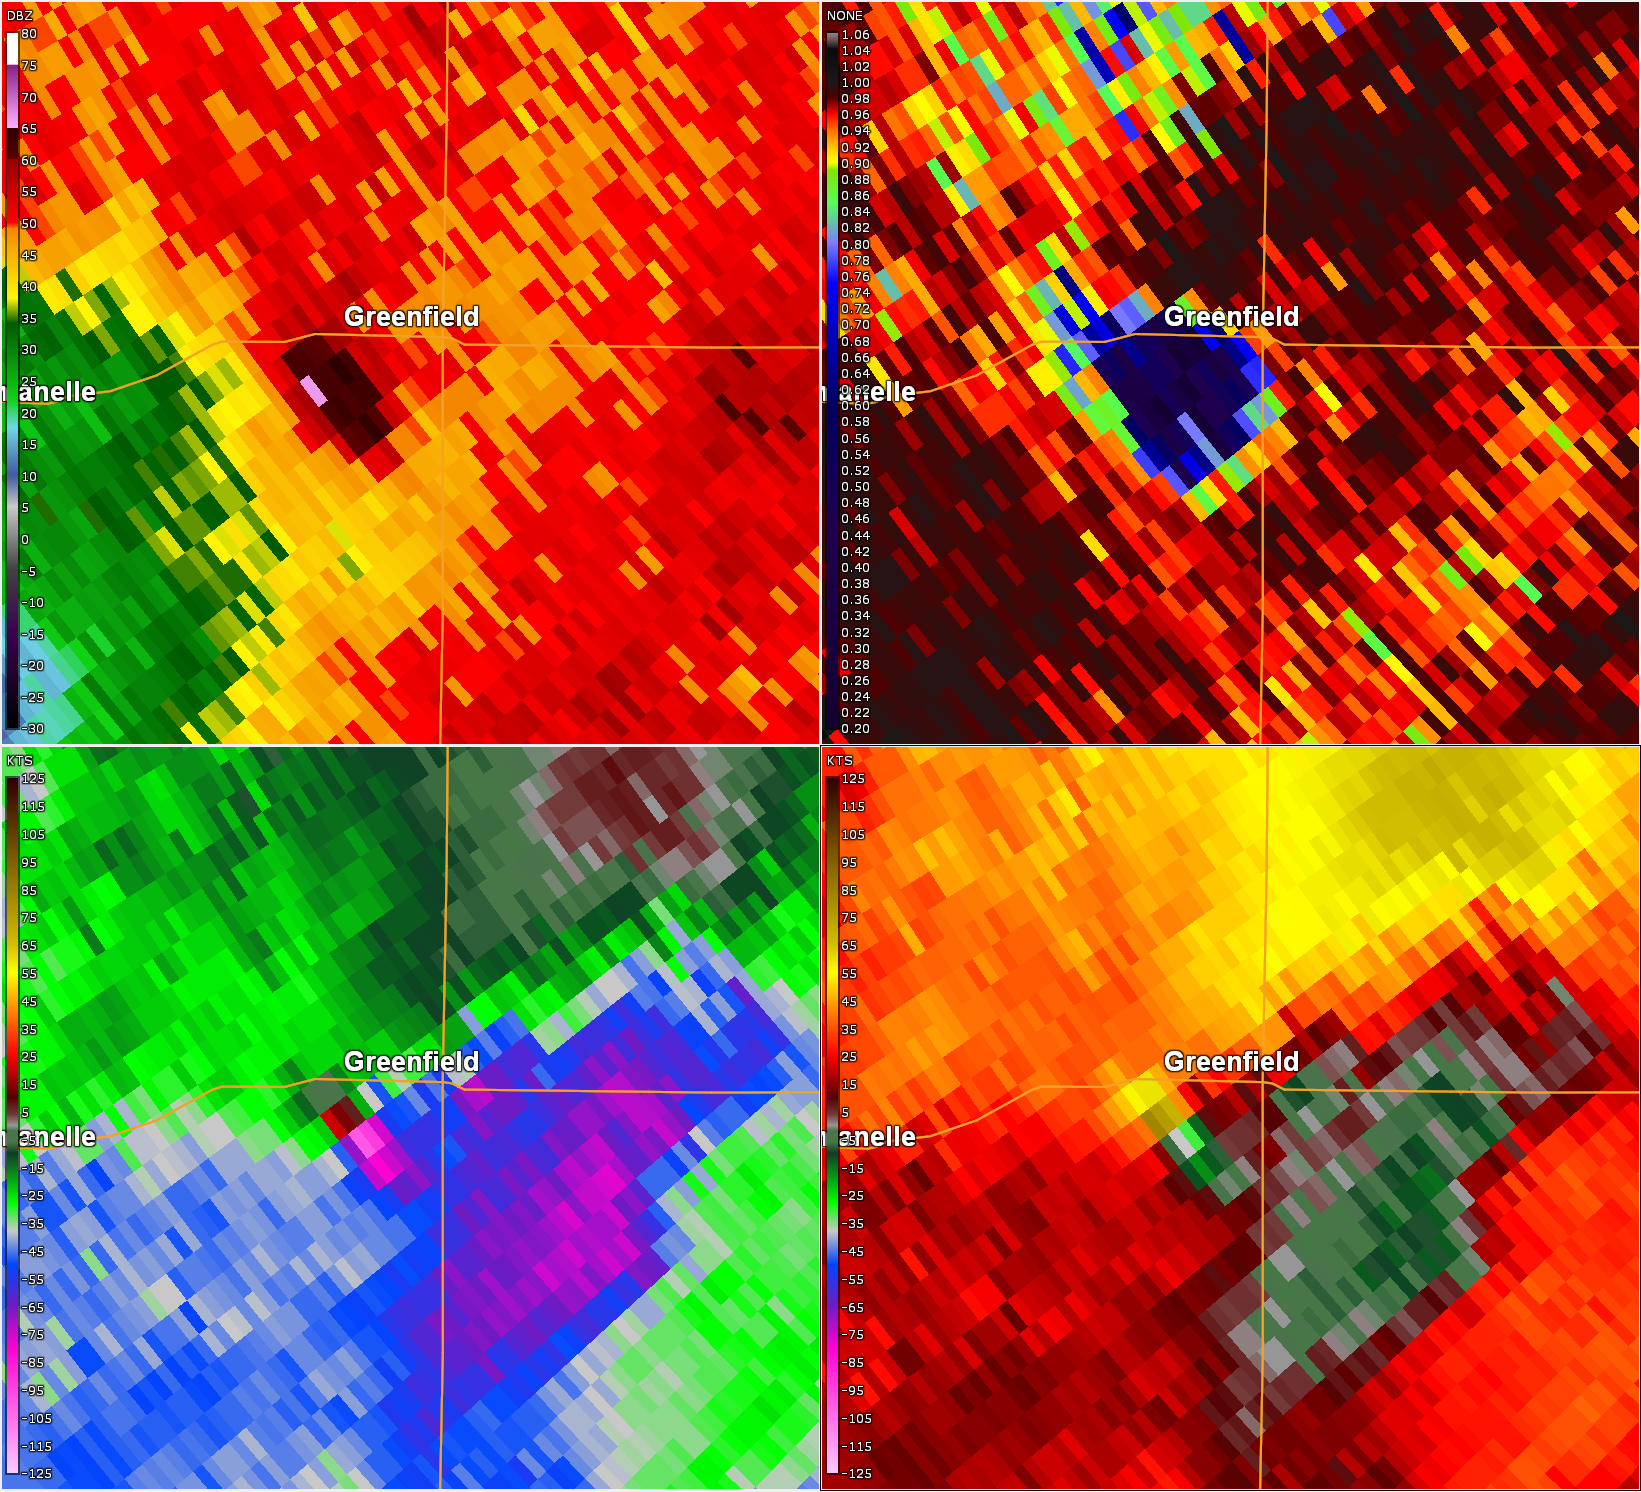 Radar image of the EF4 Greenfield tornado as it entered the town at peak intensity.